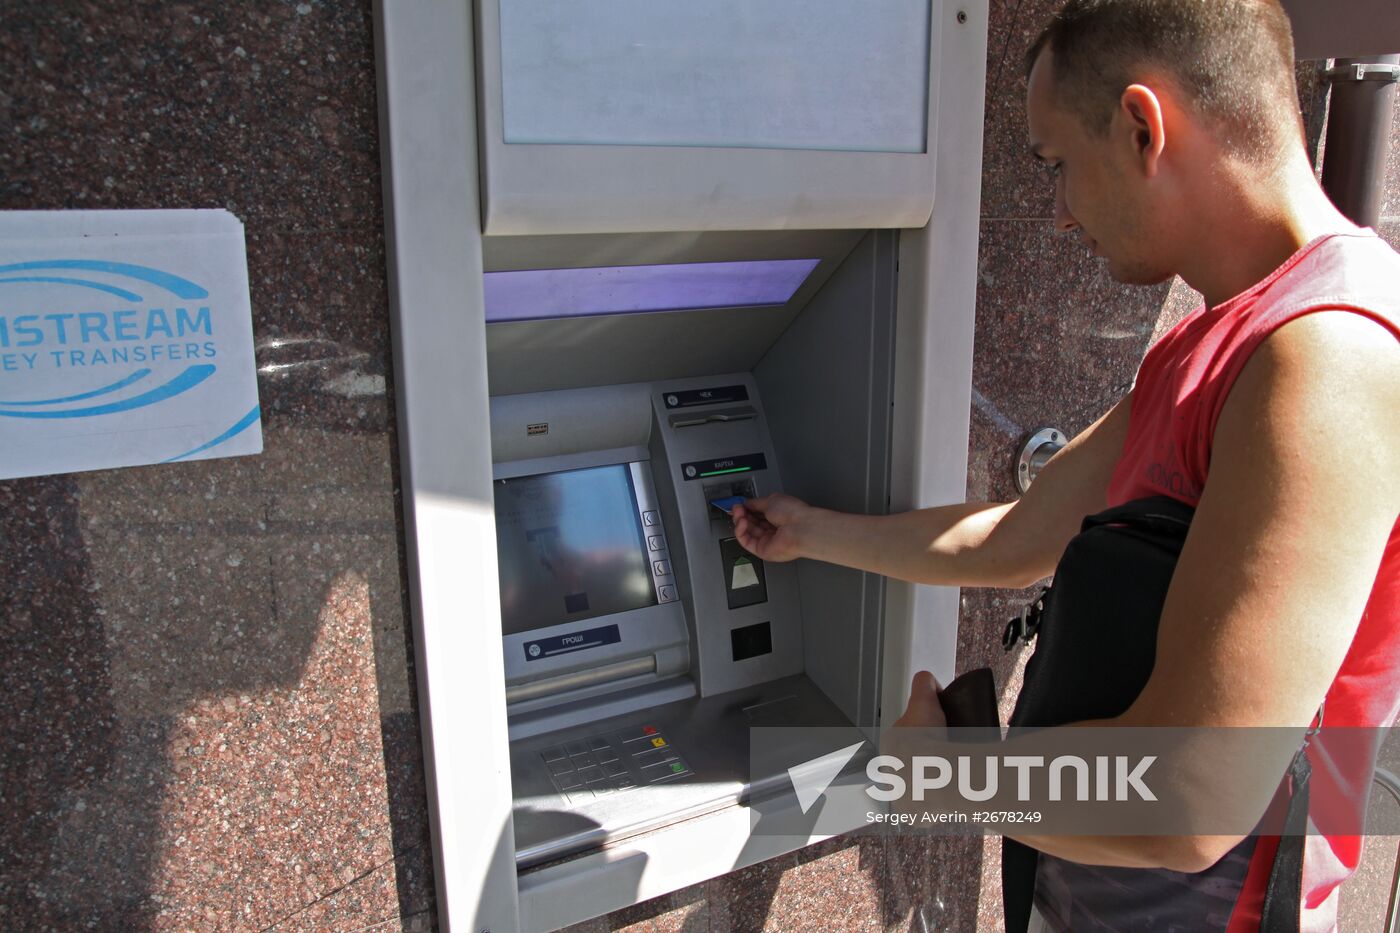 Cash dispensers become operational in Donetsk People's Republic